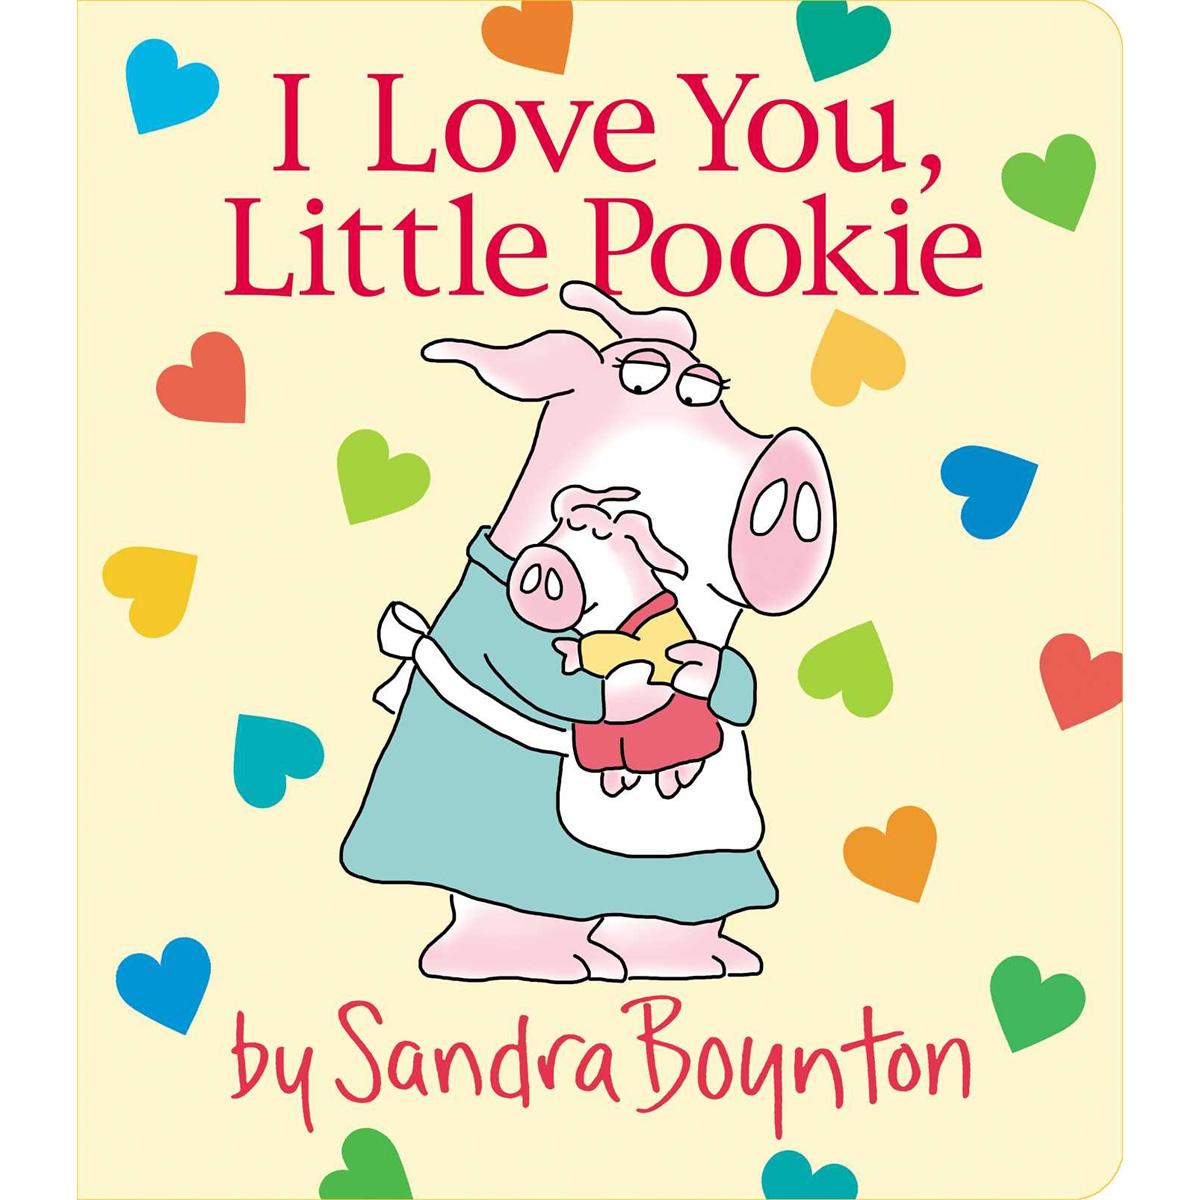 I Love You Little Pookie Kids Board Book for $2.84